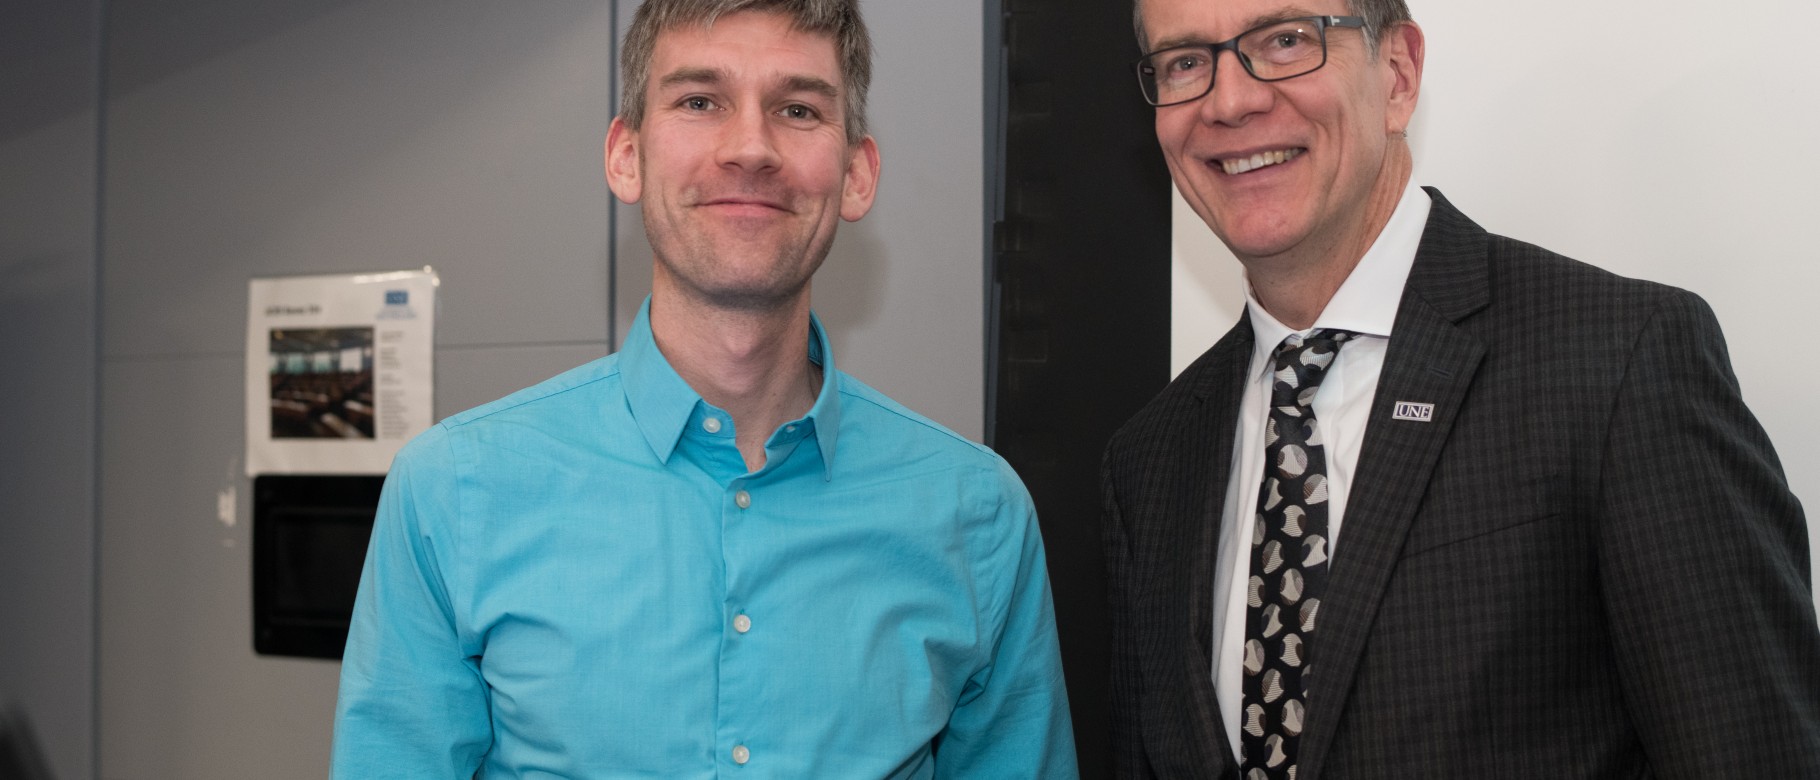 New York Times best-selling author Sam Kean with President James Herbert after his talk at the Connections Lecture Series